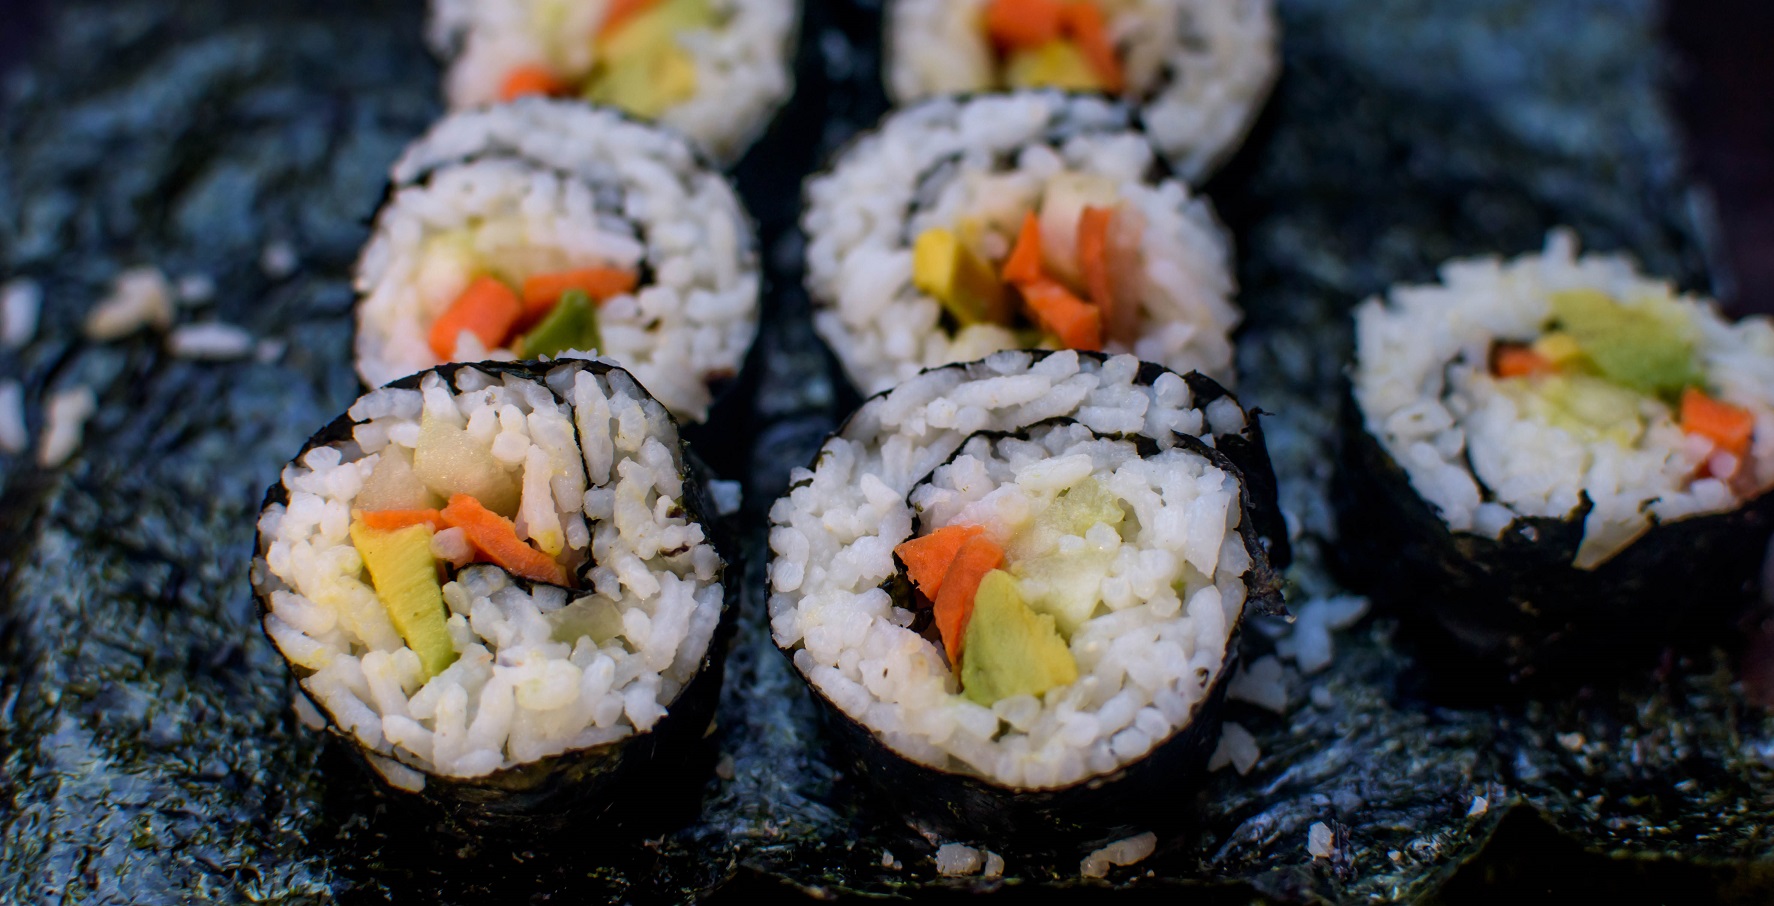 Sushi Grade Fish: How to Find the Freshest Option